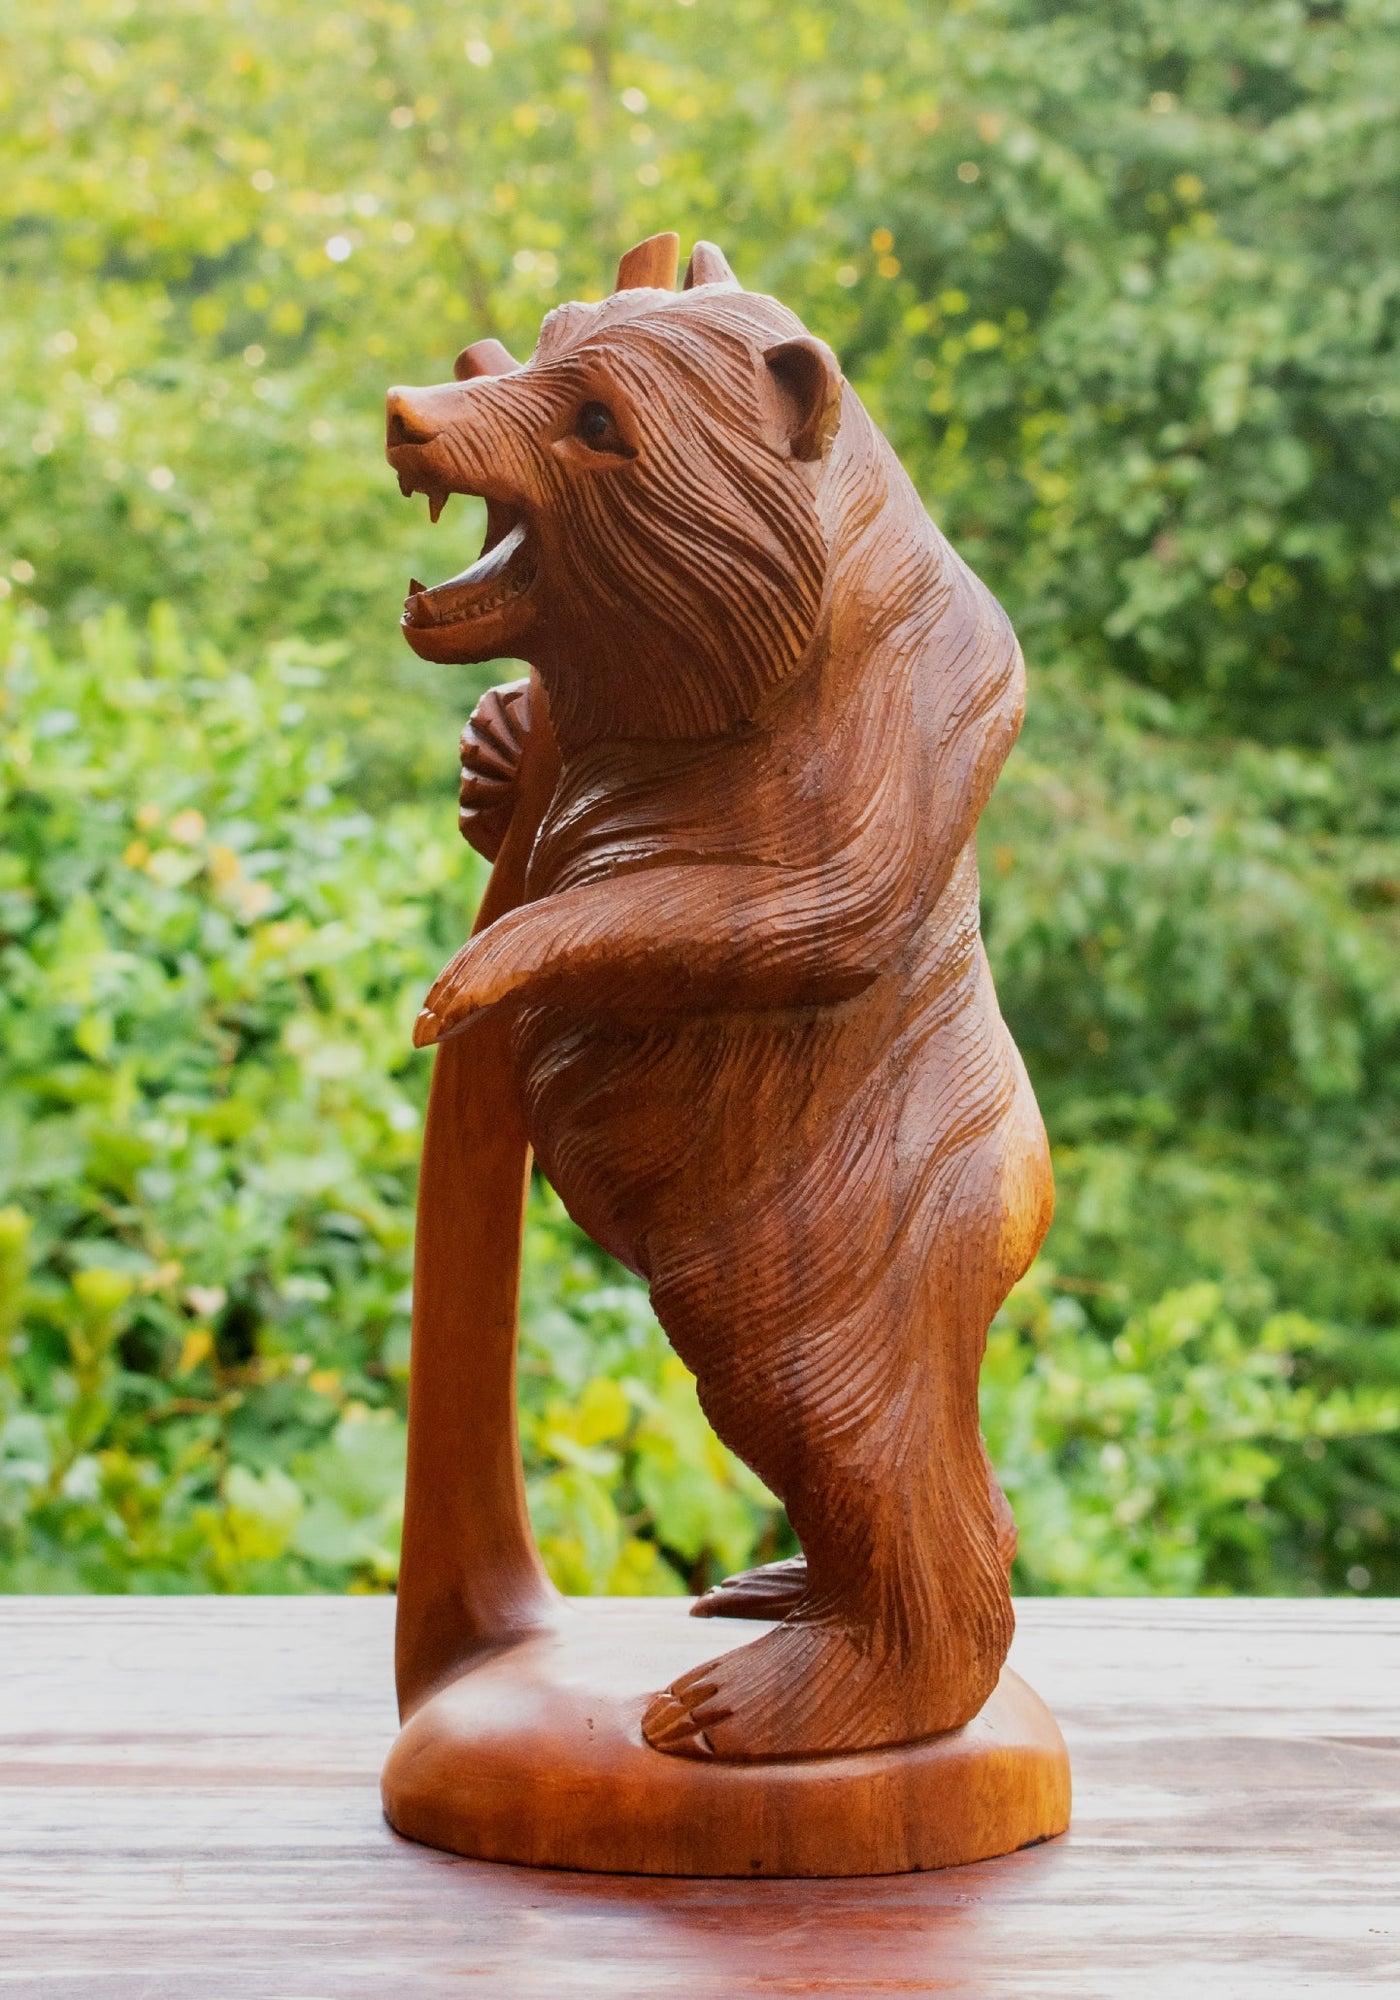 Wooden Hand Carved Grizzly Bear in a Tree Statue Handcrafted Handmade Figurine Sculpture Art Lodge Cabin Outdoor Indoor Home Decor Accent Decoration